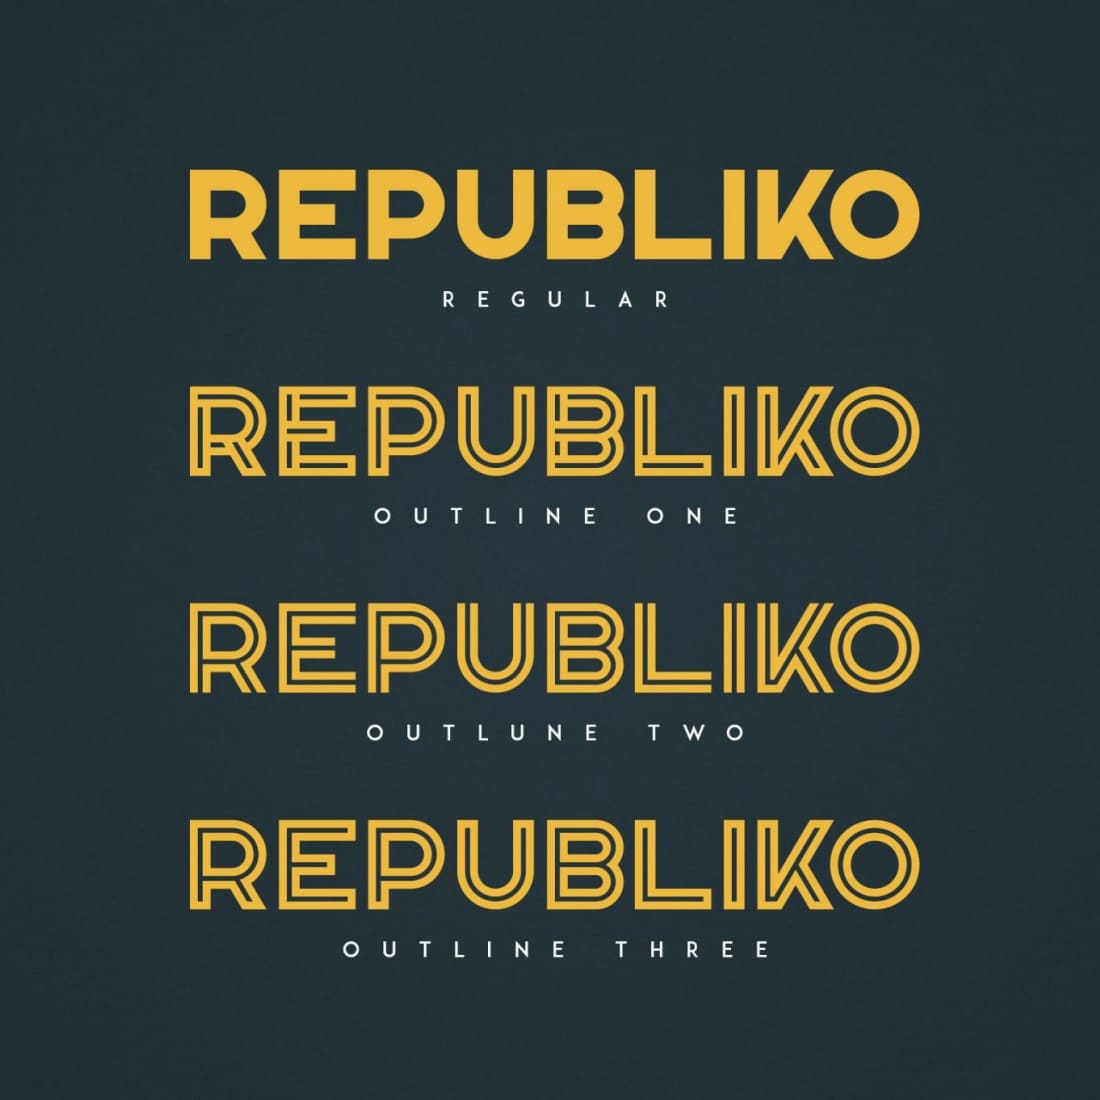 Republiko – Display Typeface preview images.